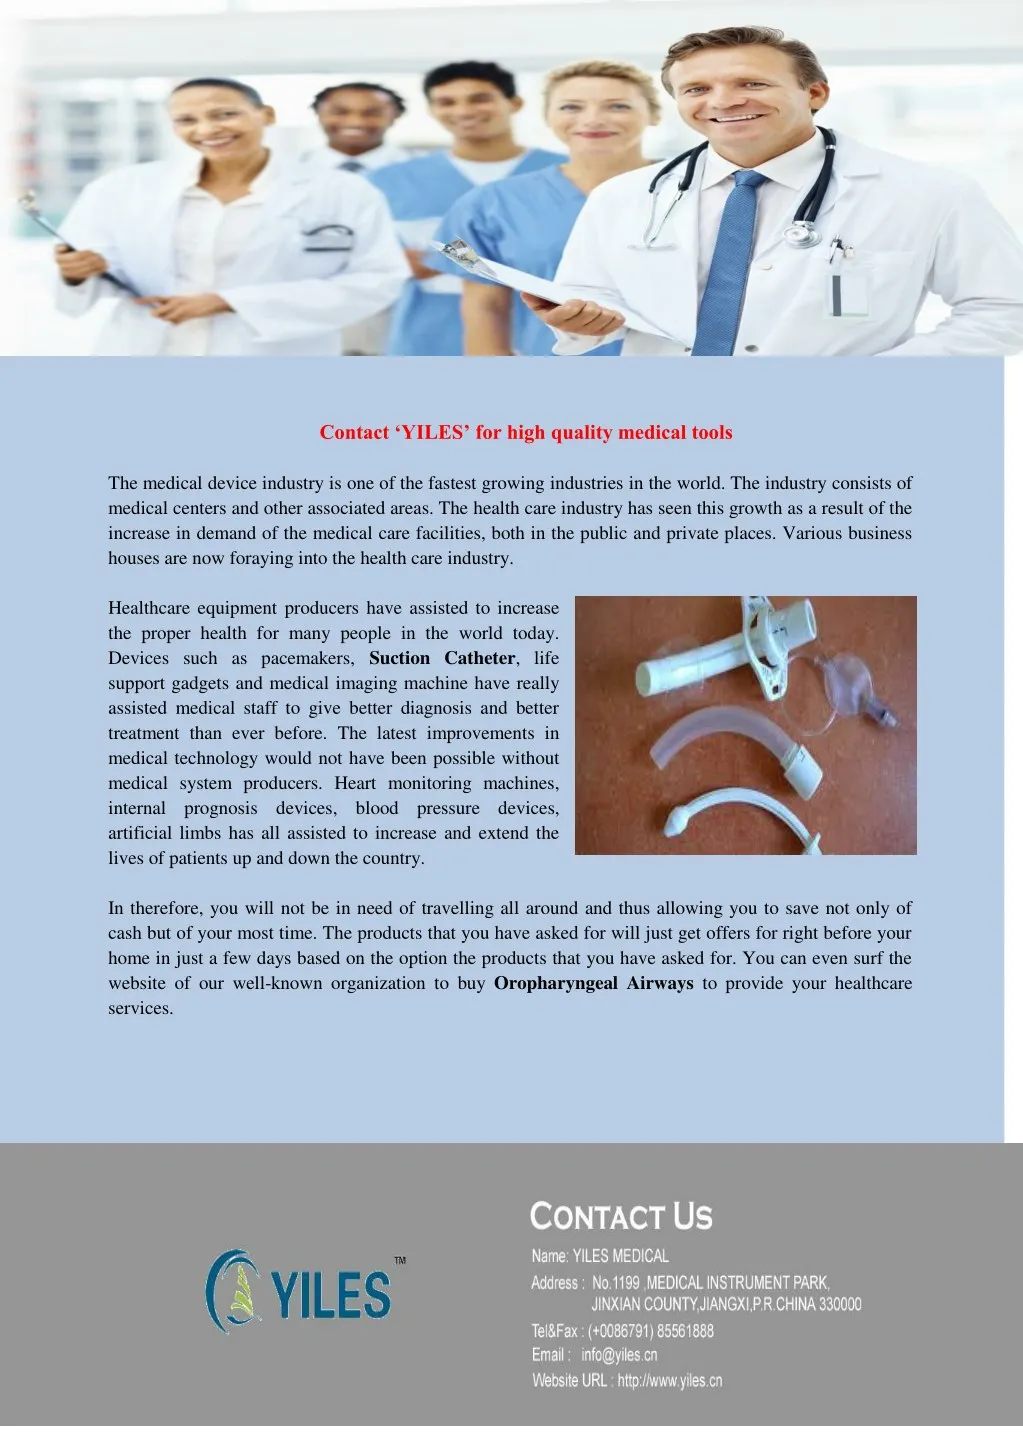 contact yiles for high quality medical tools